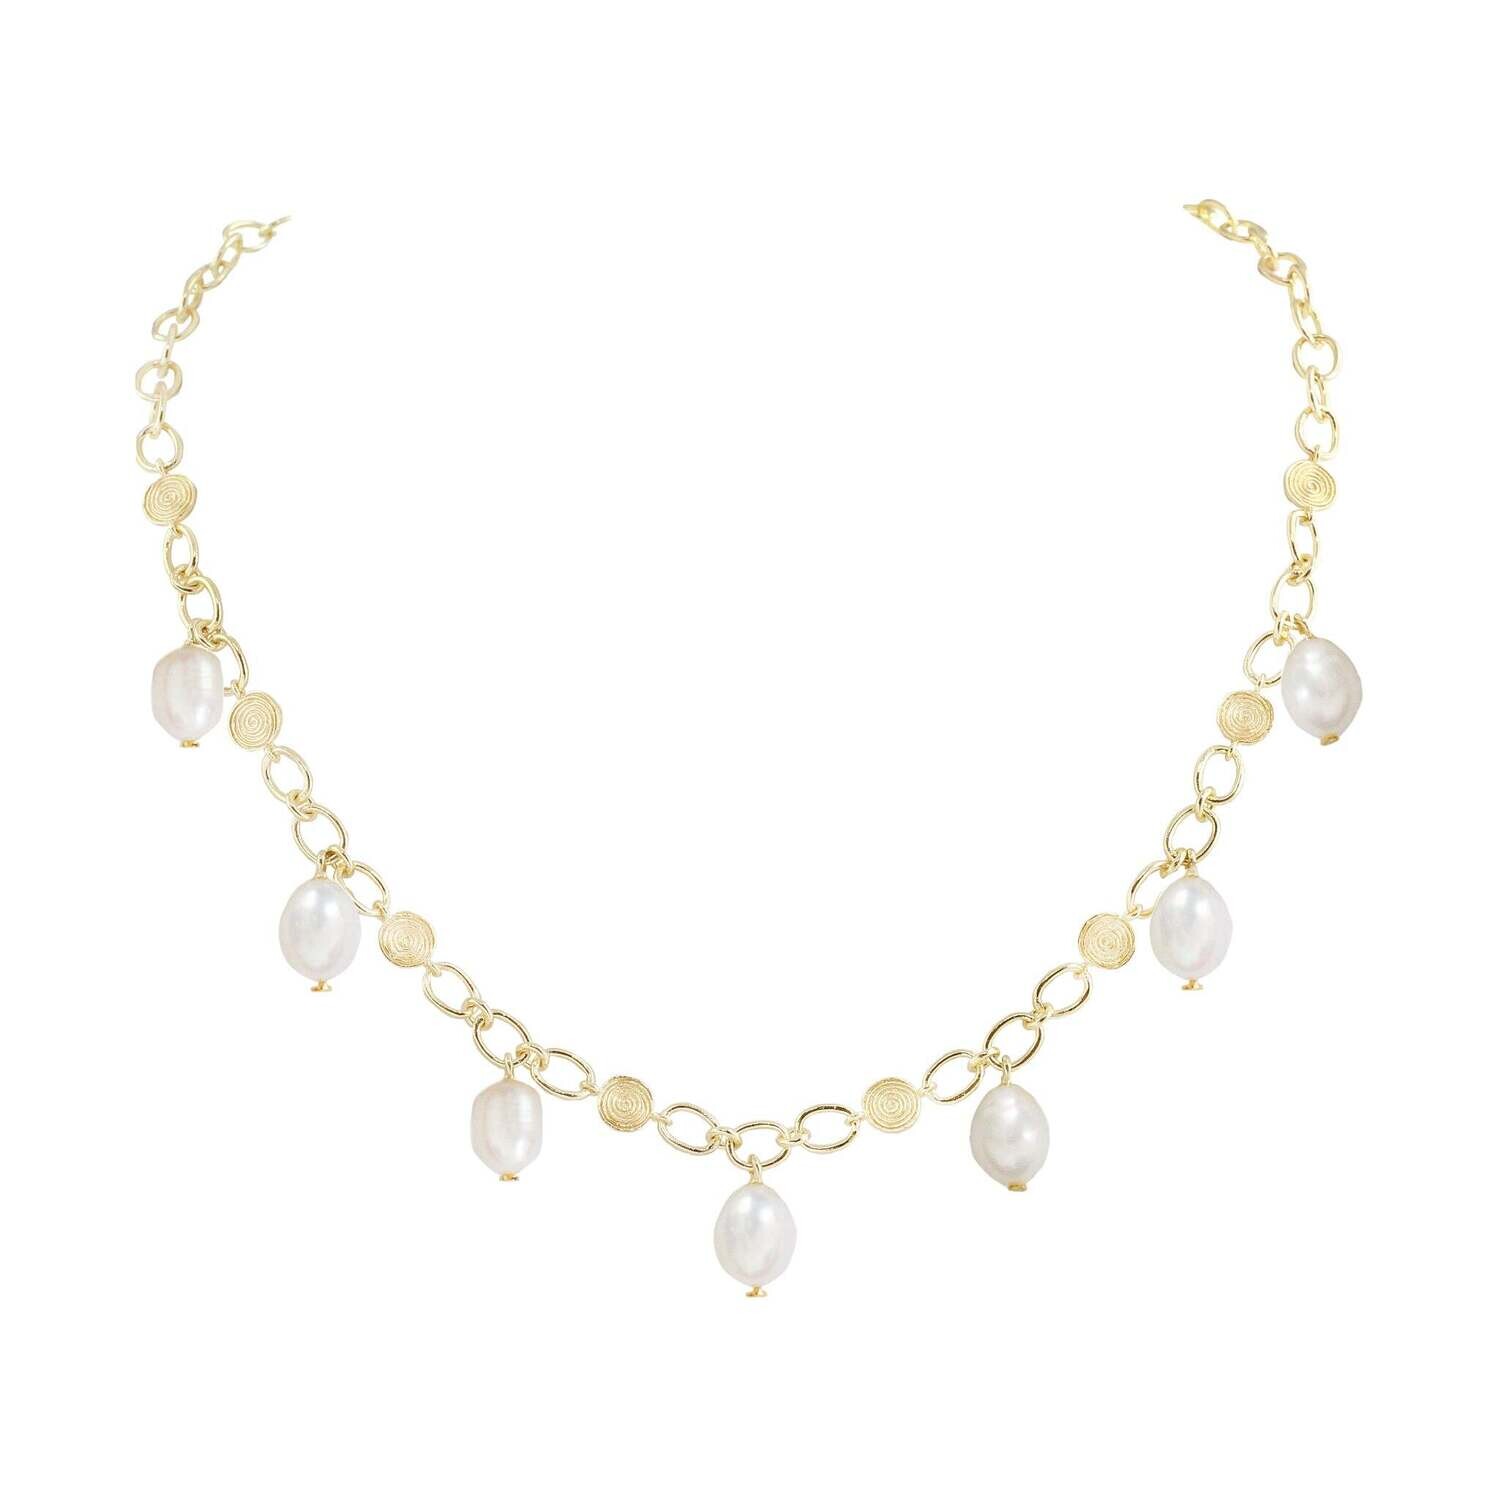 MAM 18k Gold Plated 18" Necklace with Pearls